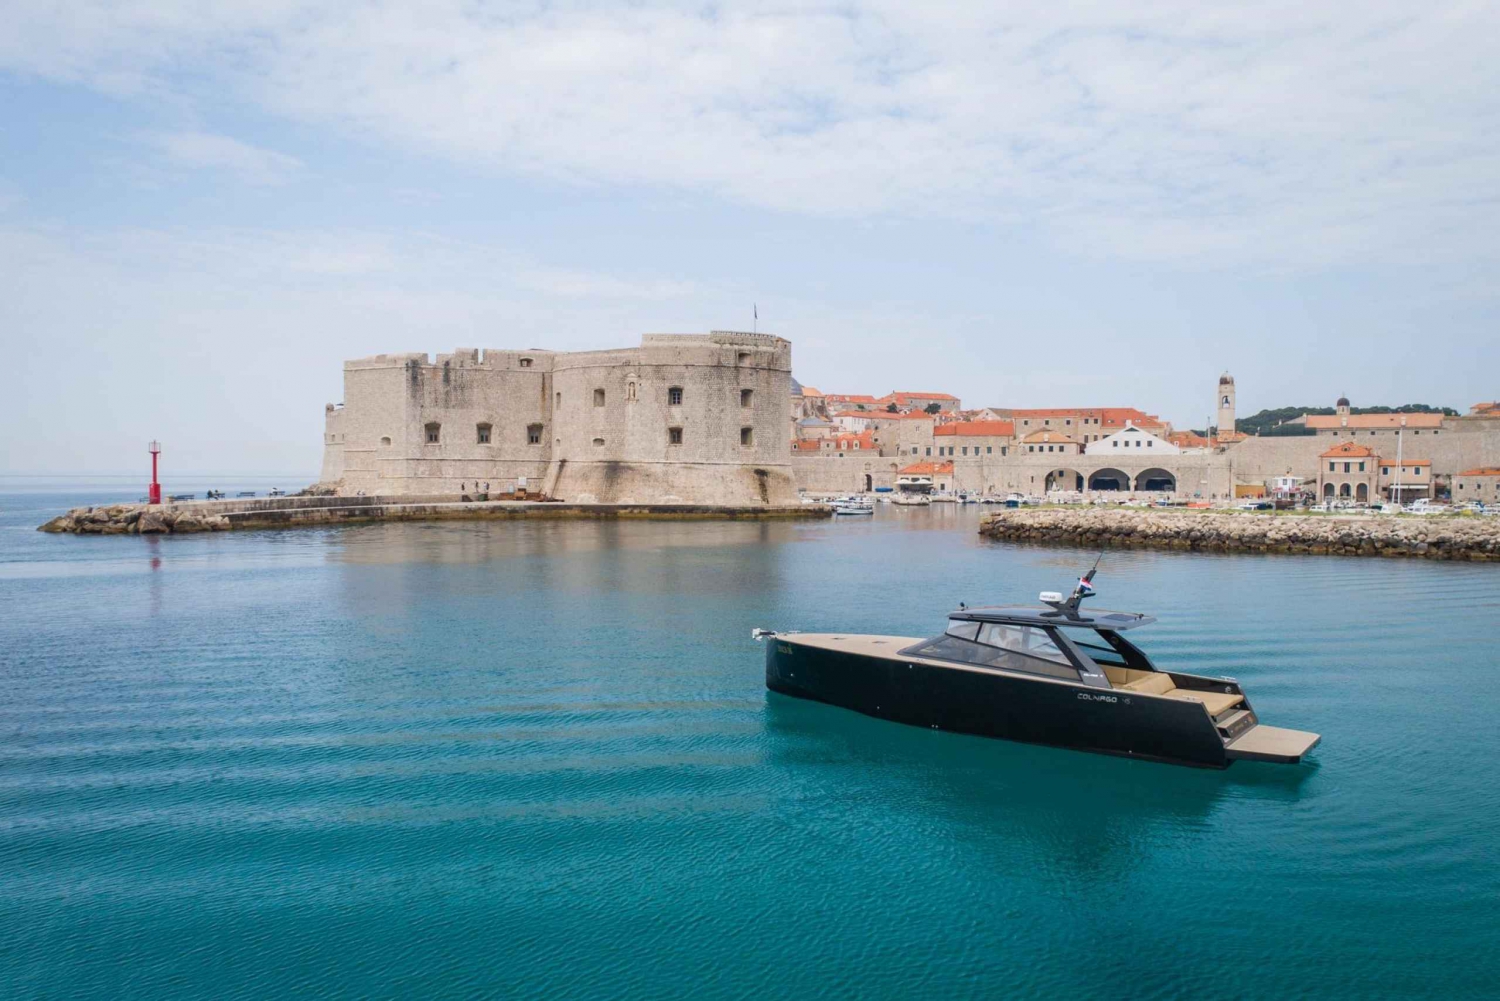 DUBROVNIK: Private luxury boat rent 4h, 6h or 8h, sunsets